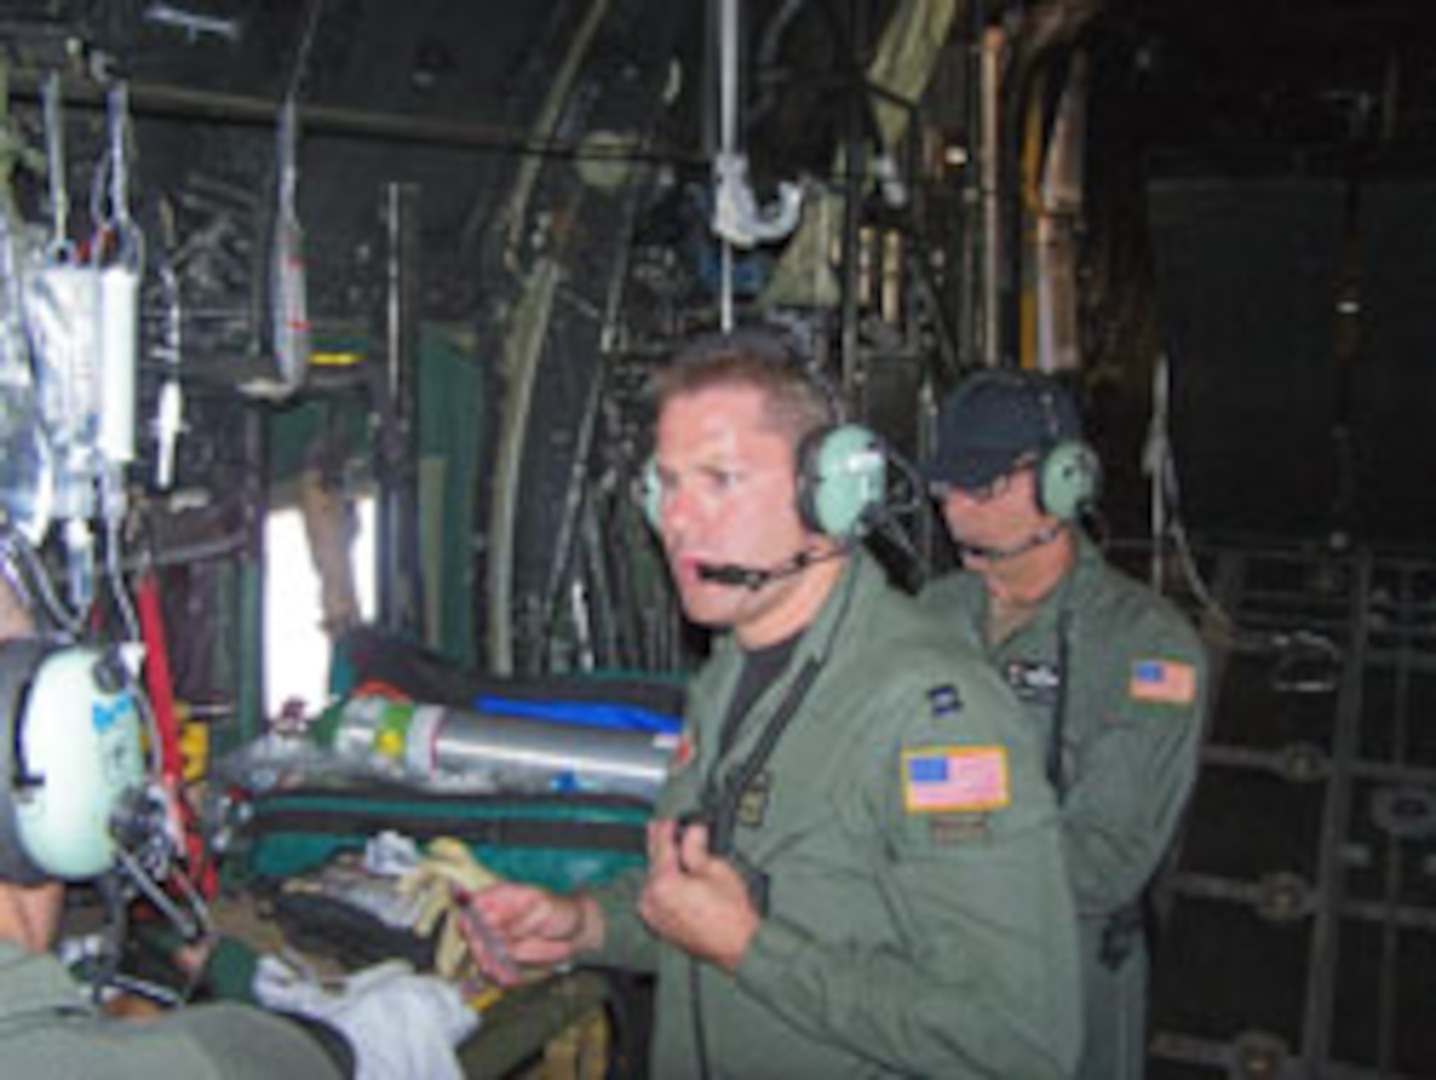 129th Rescue Wing flight surgeon,. Maj. (Dr.) Joshua S. Kucker, center, and MC-130P loadmaster, Senior Master Sgt. William J. Wunderlin, right, treats and assists one of the critically injured children during the flight to Naval Air Station North Island, CA.